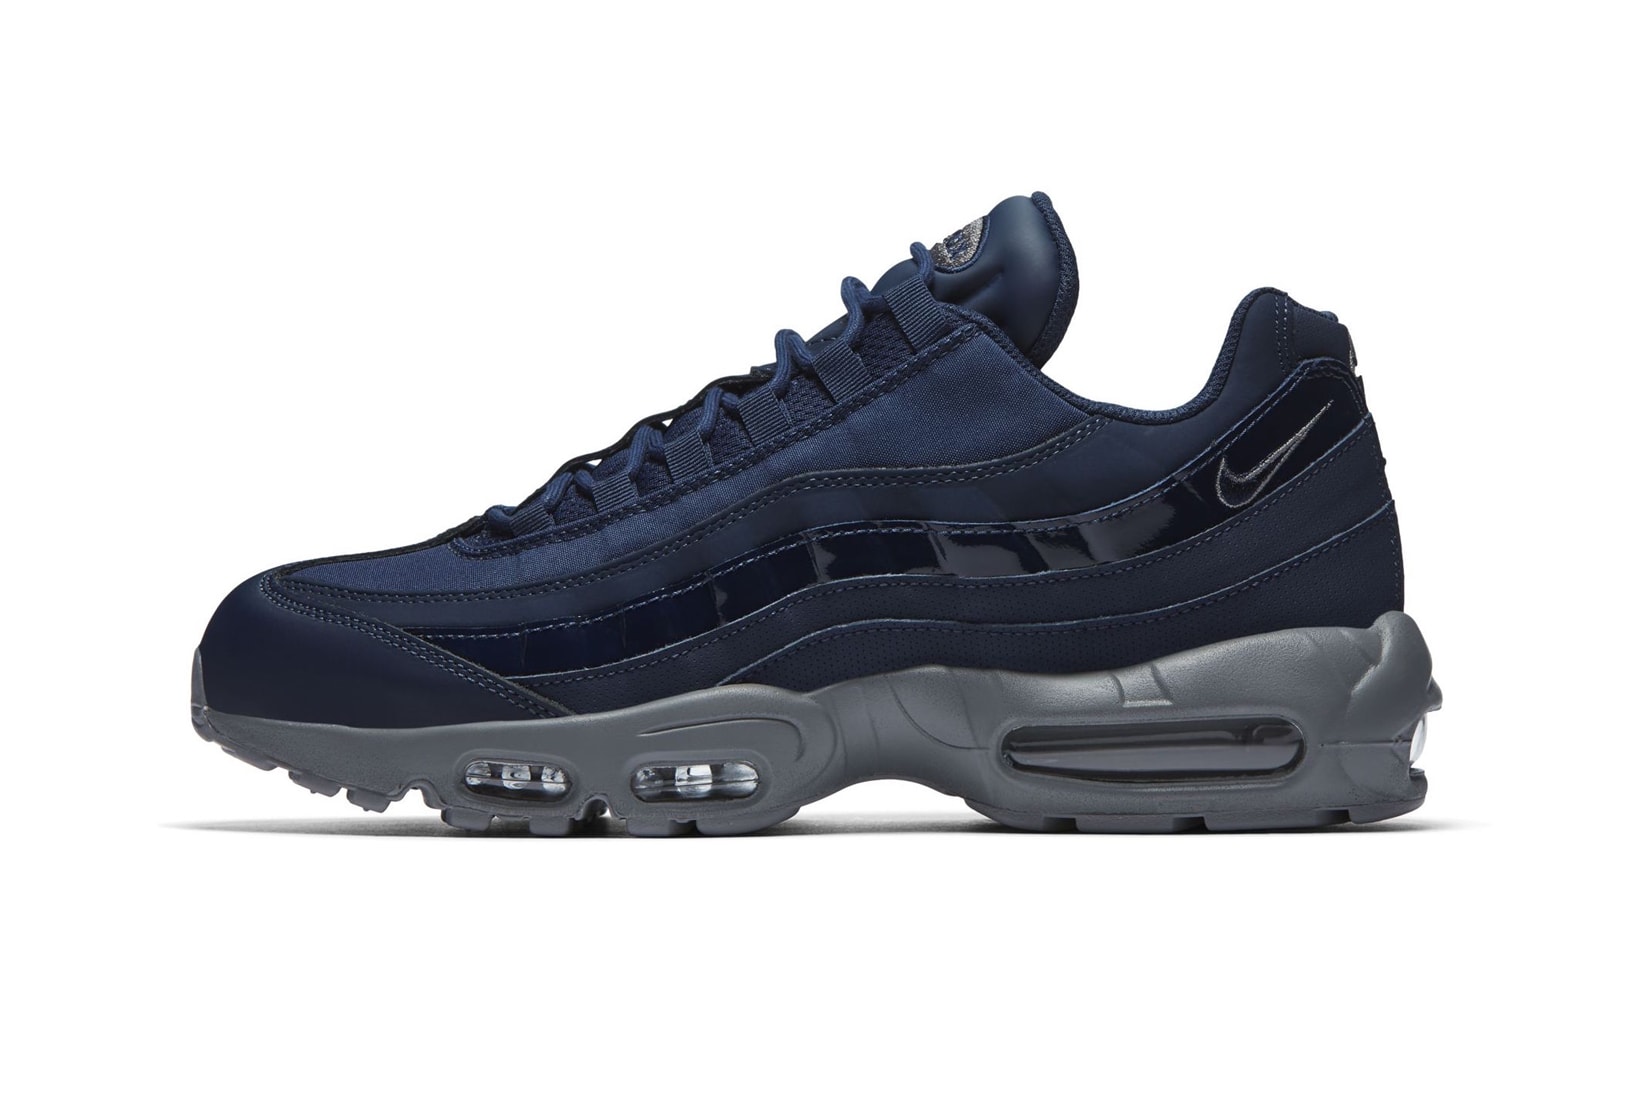 nike air max 95 obsidian patent leather sneakers shoes footwear